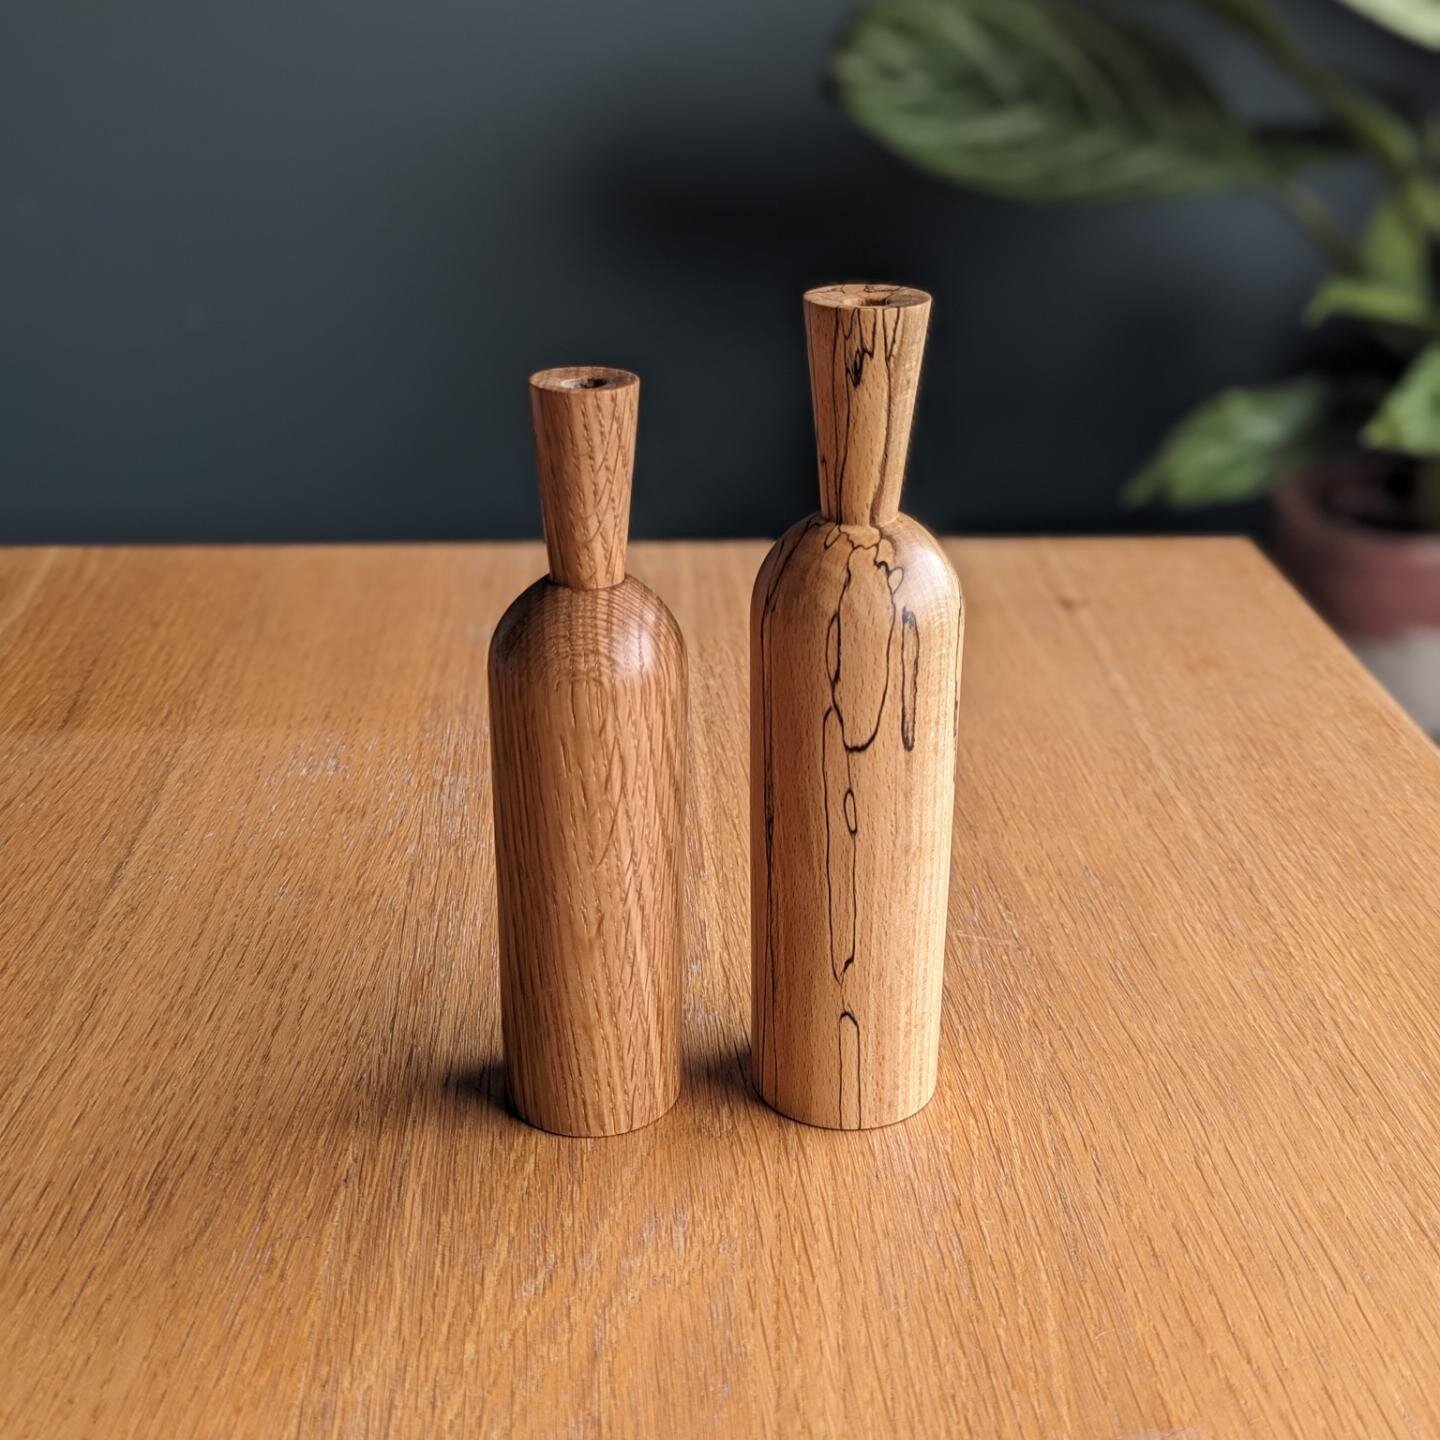 A new shape of bud vase I've been turning recently. 

I have been trying to get to grips with my @richard_findley parting/skew chisel, and these give me the chance to practice - as I can do the whole thing with said tool. 

Oak and Spalted Beech here